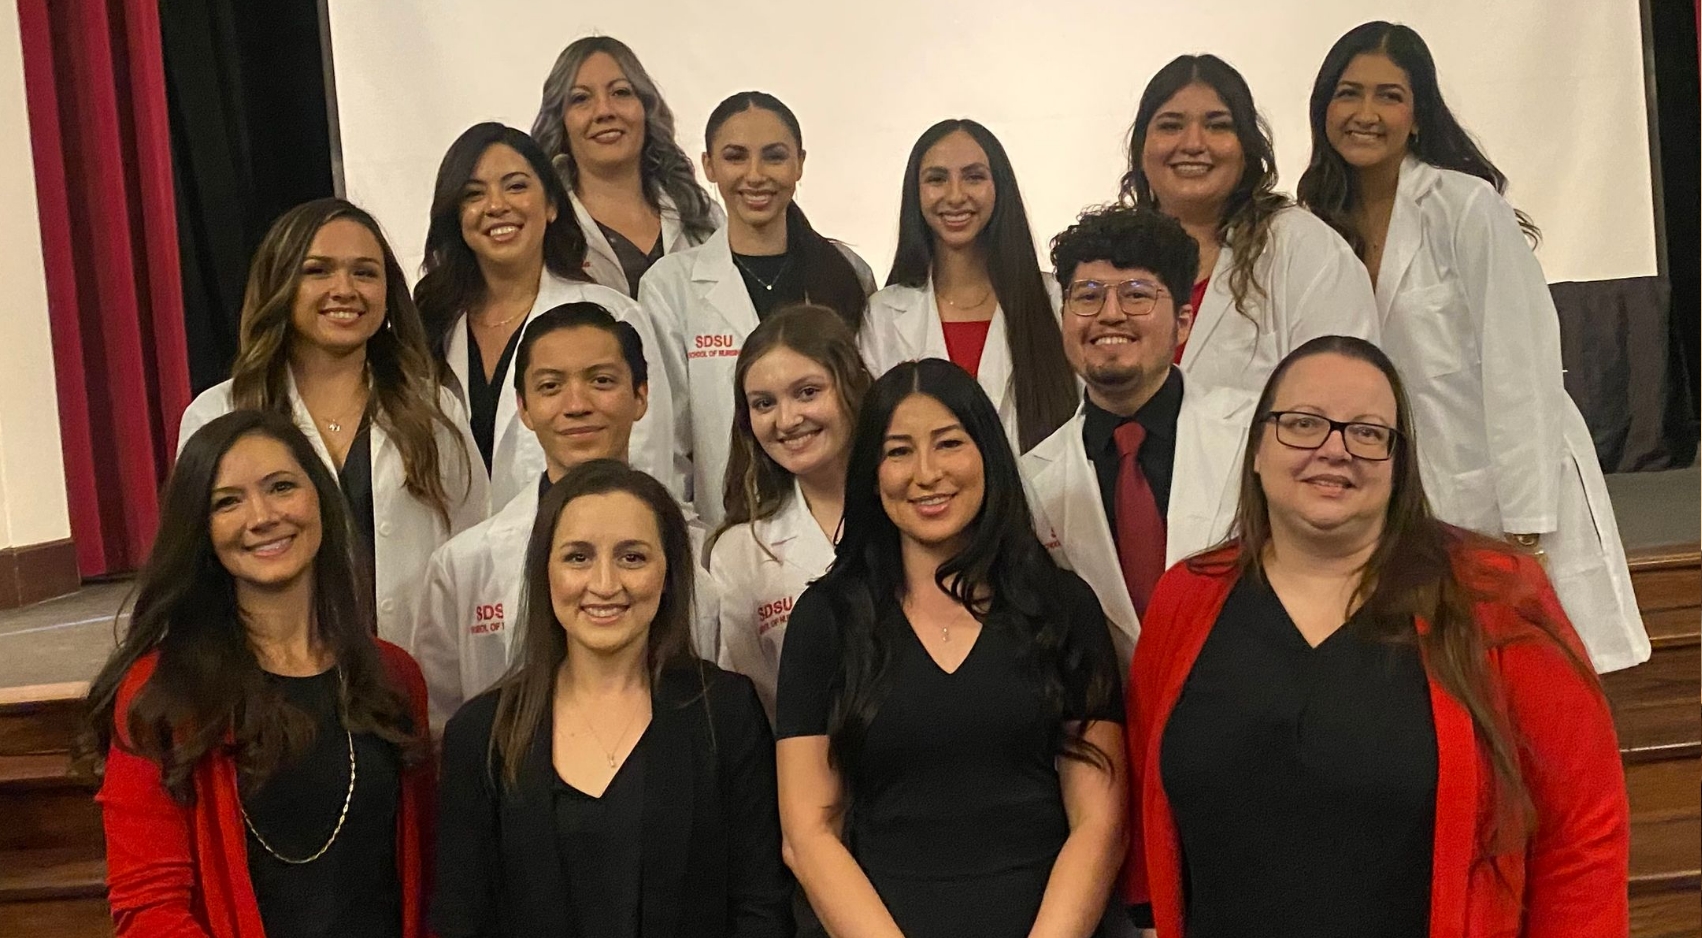 Students in SDSU Imperial Valley's new accelerated Bachelors of Nursing program pose in their white coats, along with their instructors